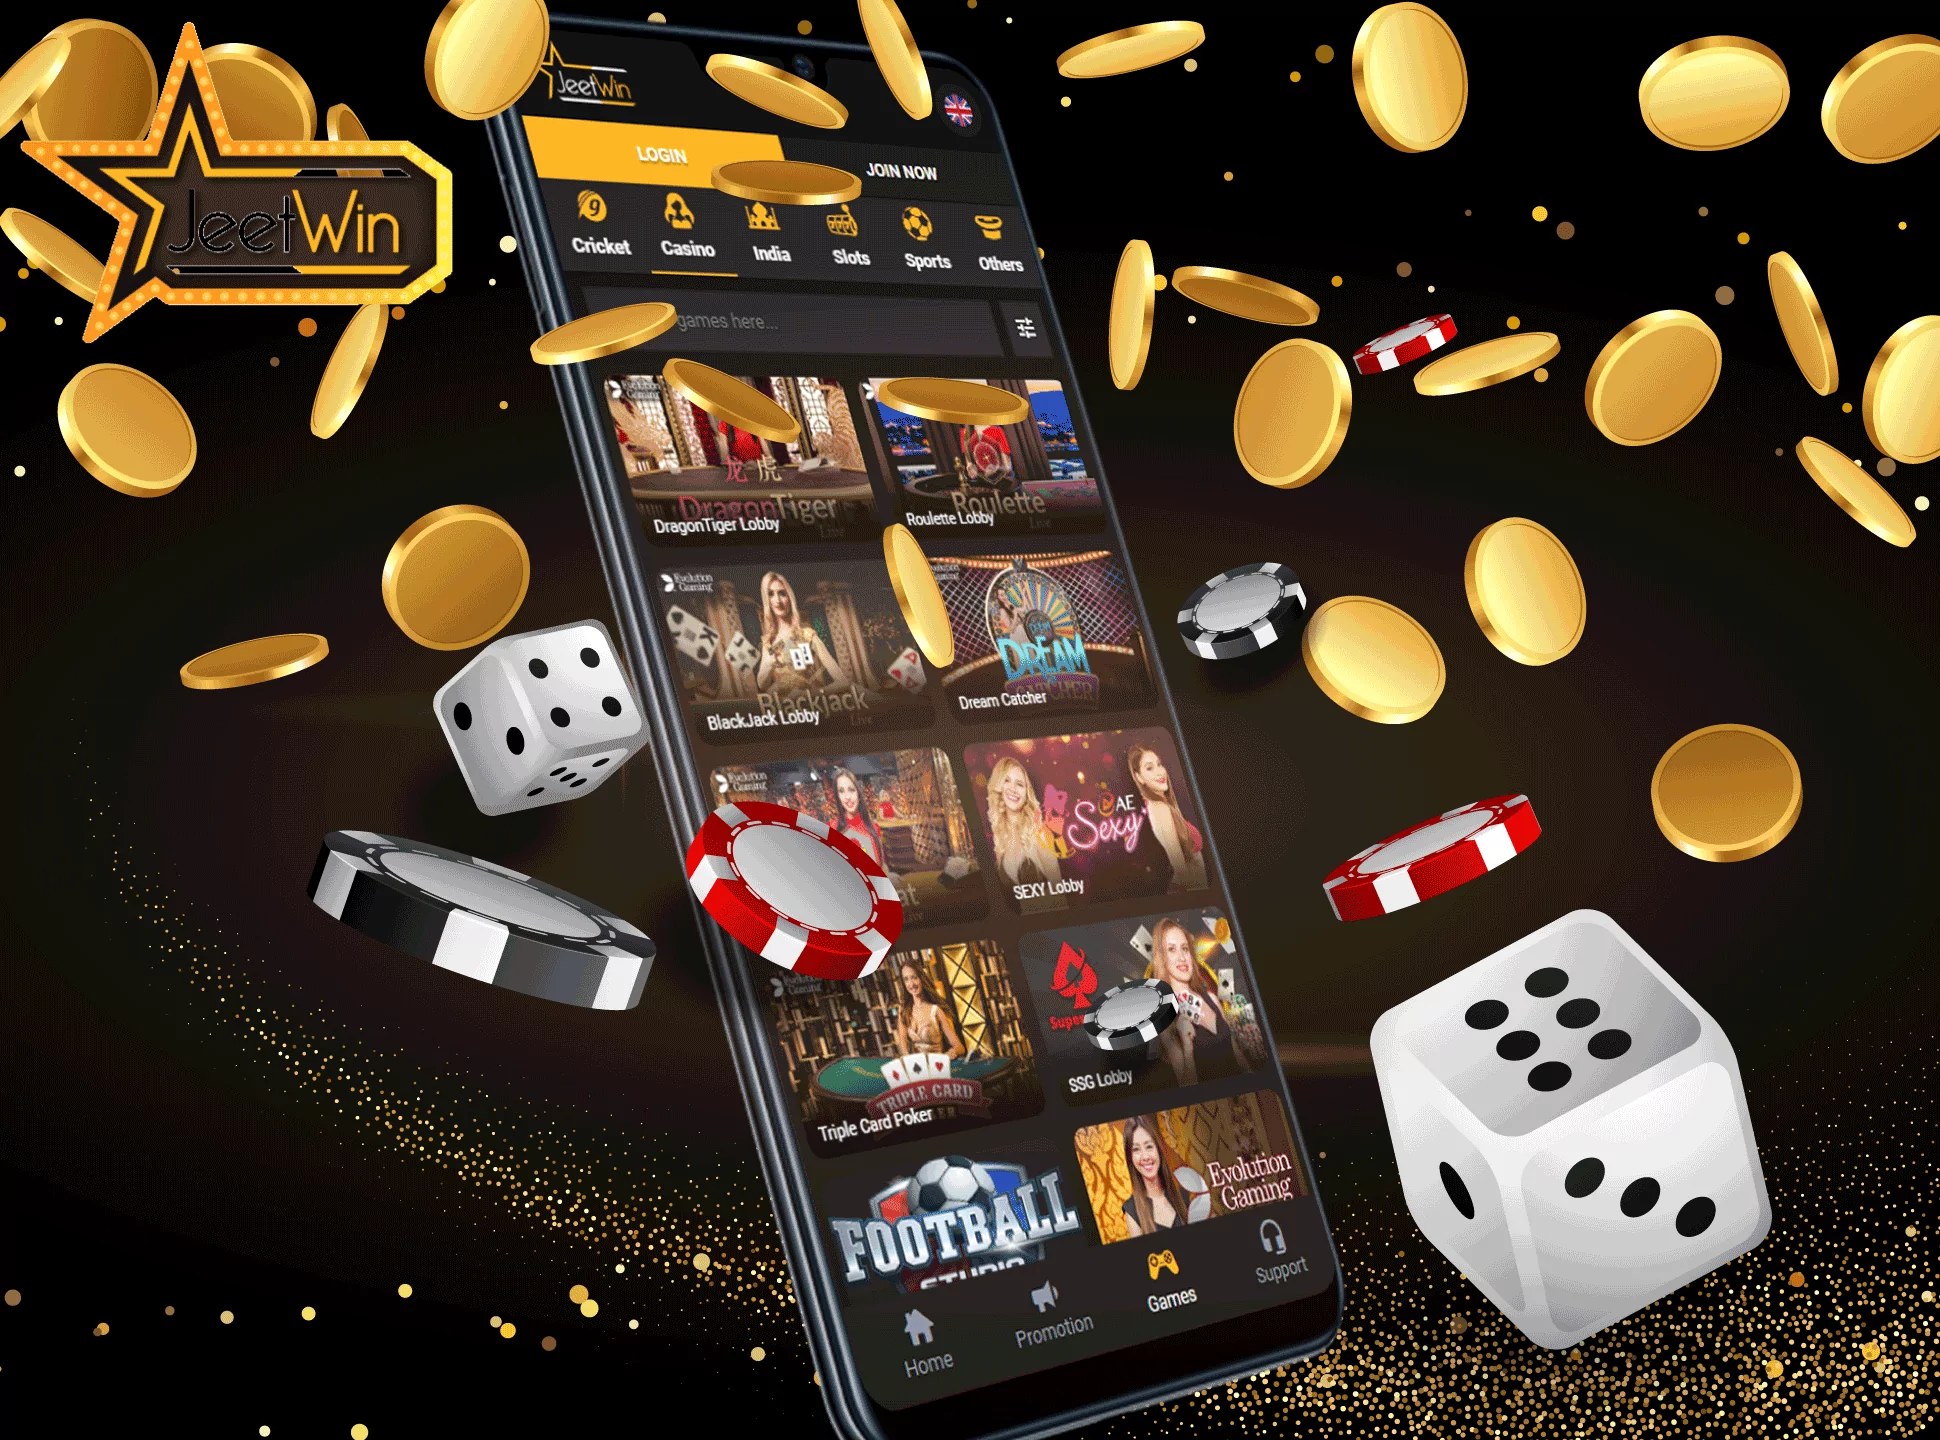 Jeetwin casino section contains hundreds of popular and exciting casino games.